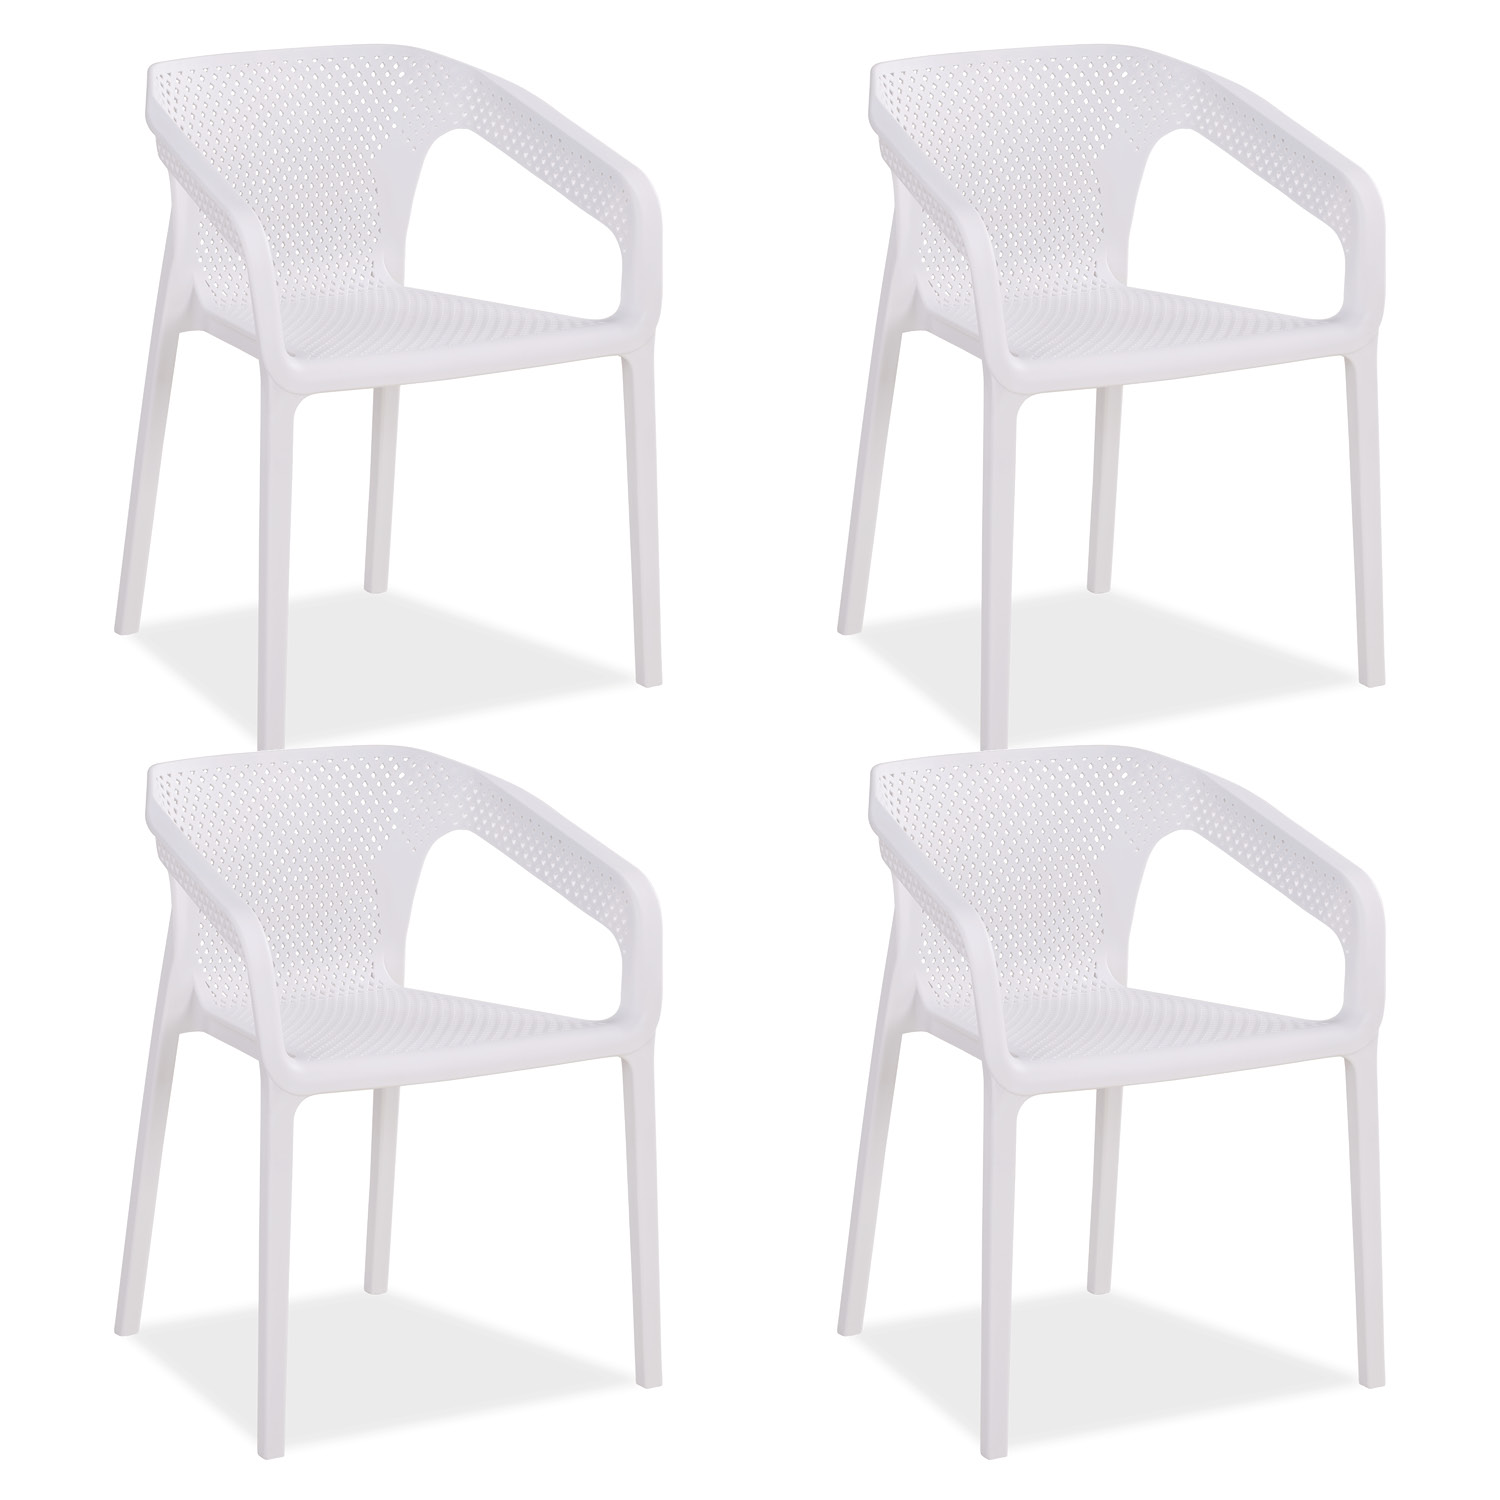 Set of 4 Garden chair with armrests Camping chairs White Outdoor chairs Plastic Egg chair Lounger chairs Stacking chairs